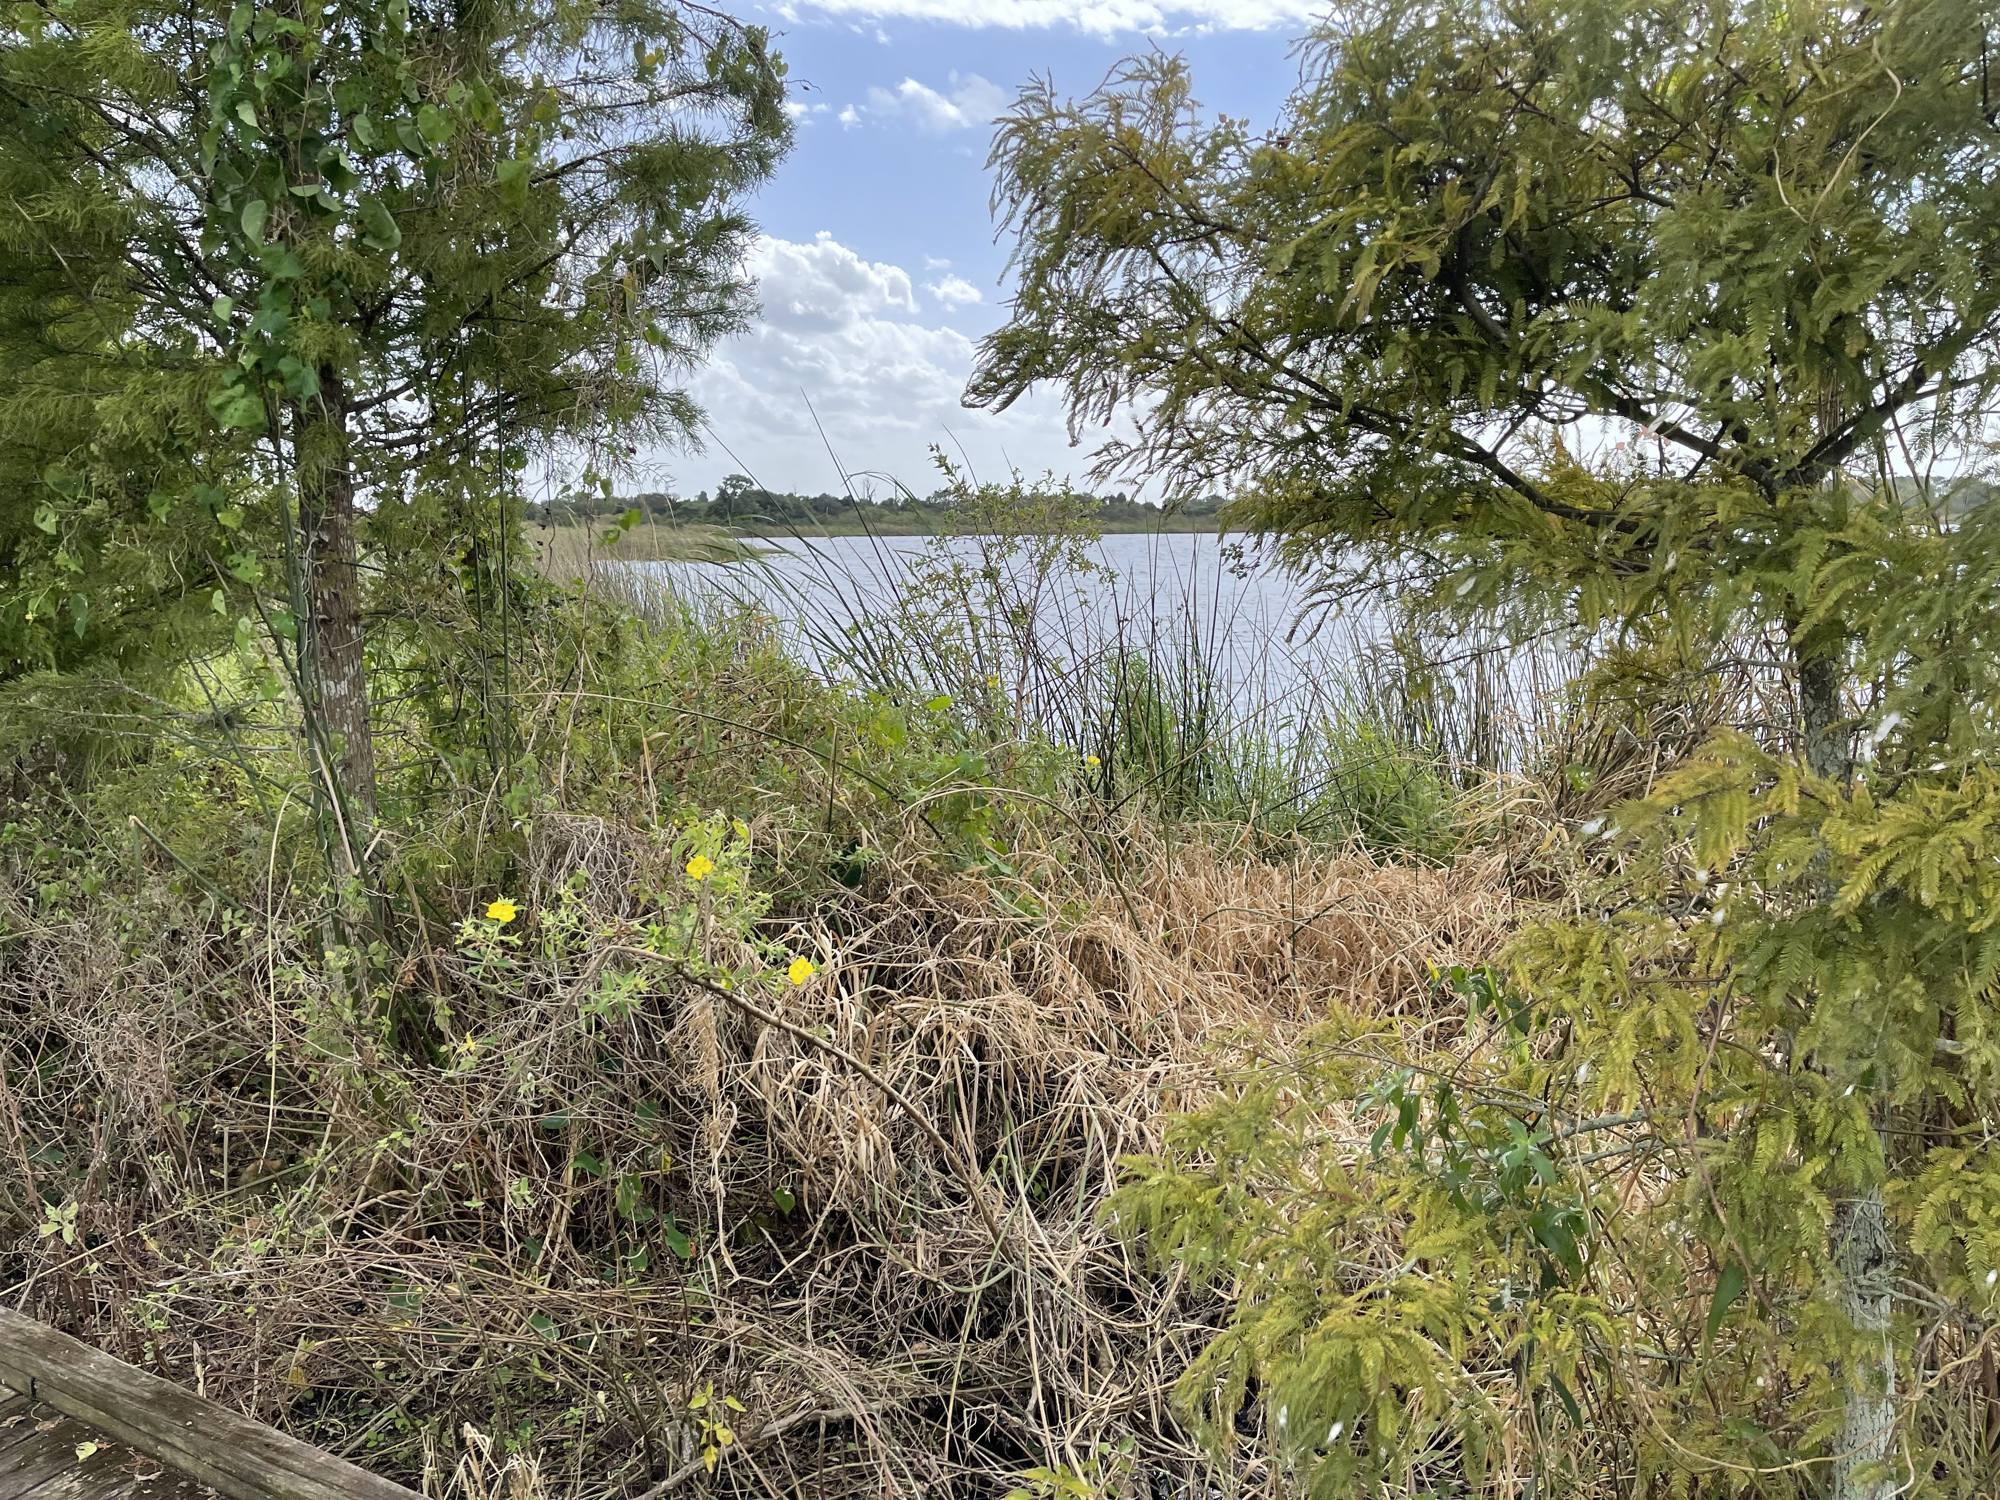 Jiggs Landing Preserve, located near Lakewood Ranch on Linger Lodge Road, is another environmentally sensitive land thats owned and protected by Manatee County.